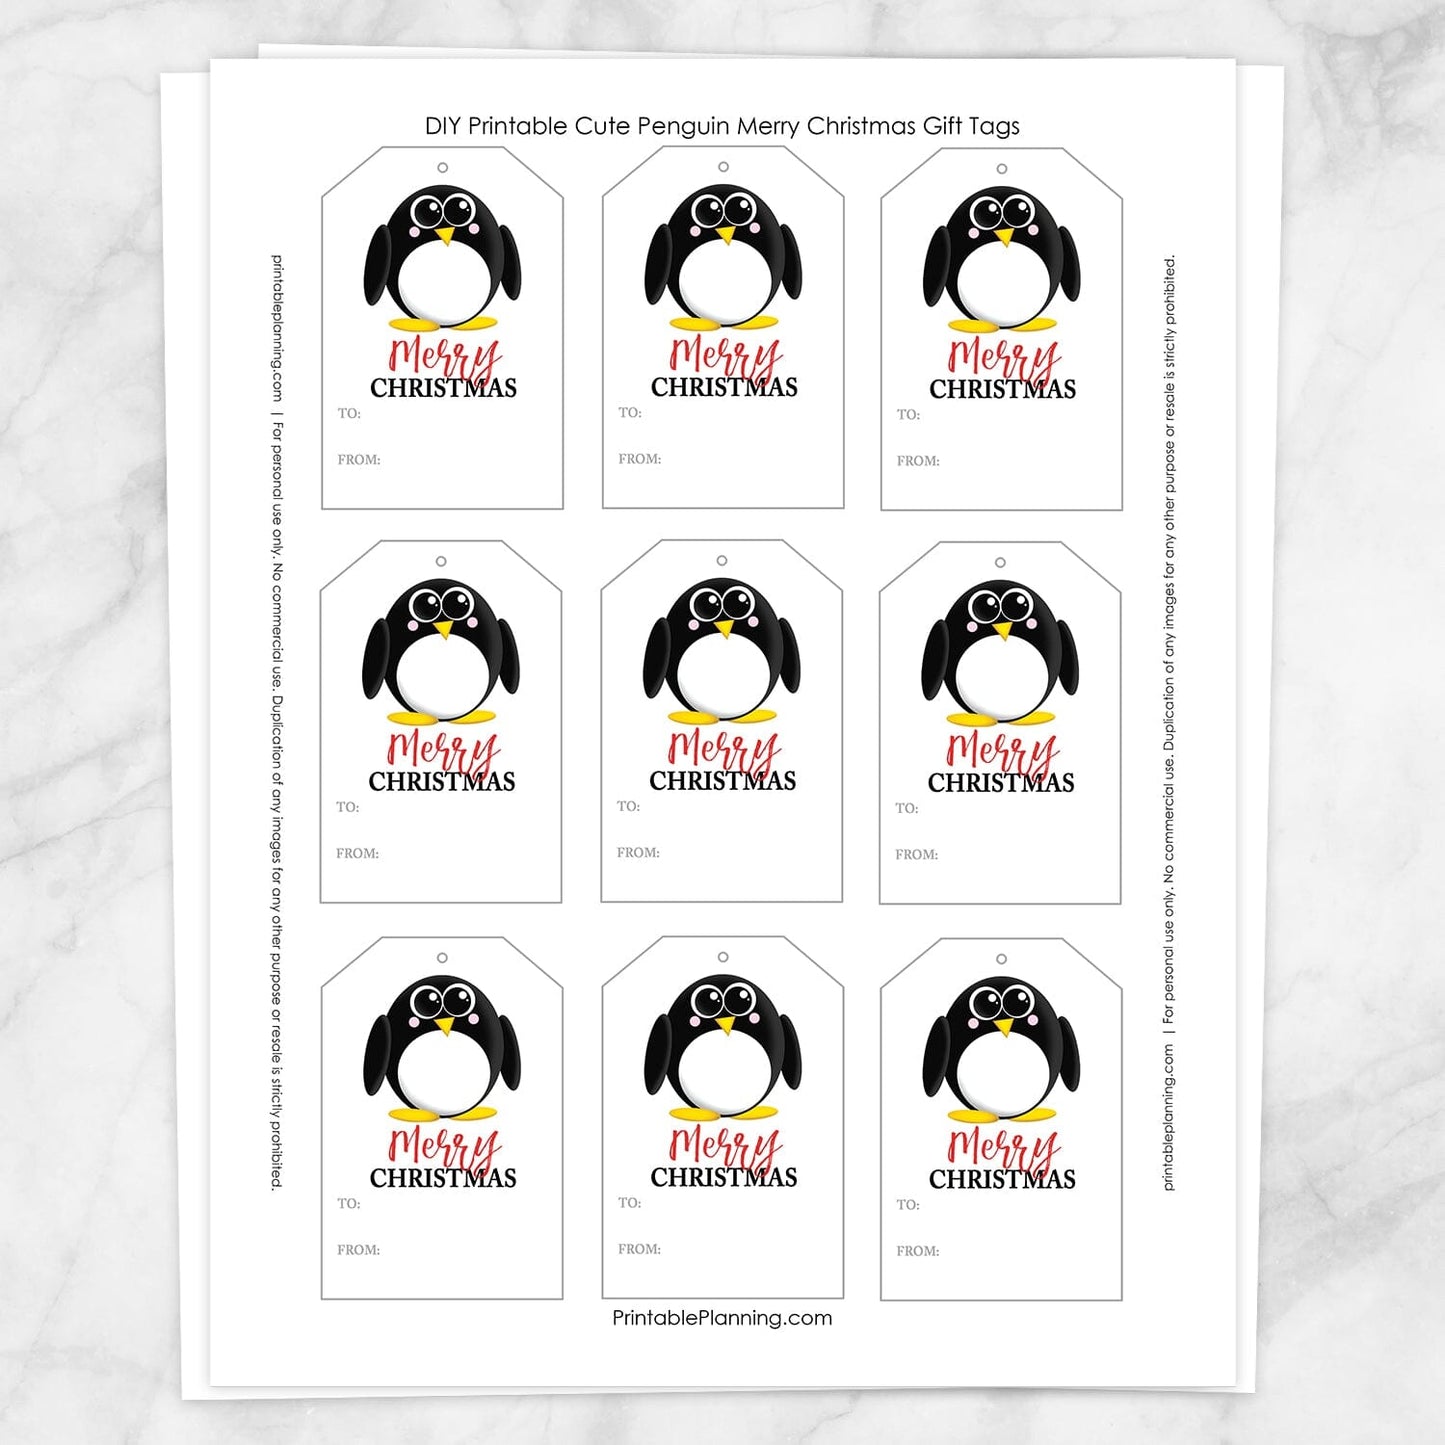 Printable Cute Penguin Merry Christmas Gift Tags at Printable Planning. Sheet of 9 gift tags.